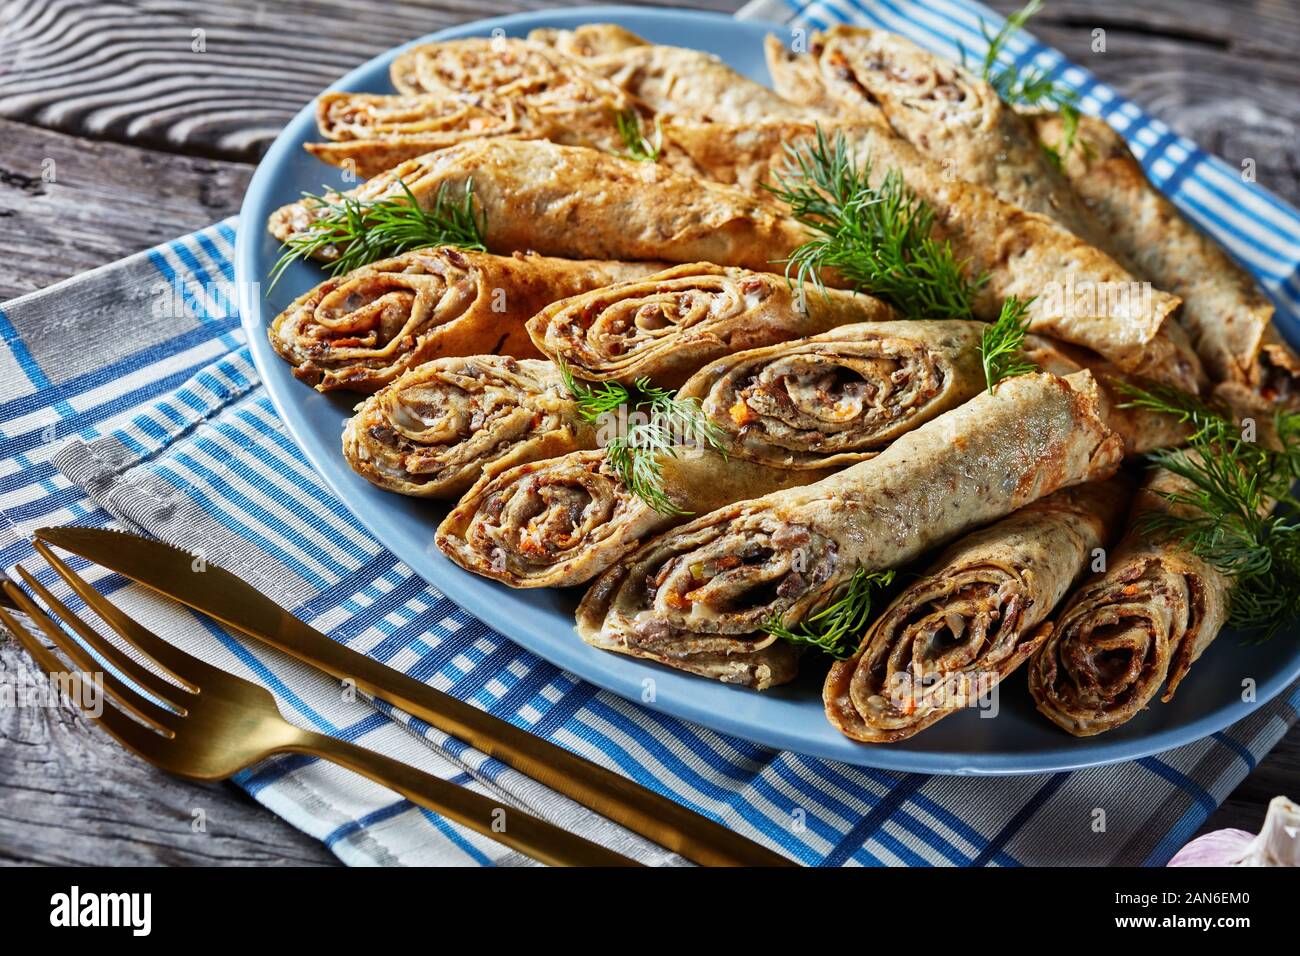 buckwheat crepes rolls with meat, vegetables and mushrooms fillings on a plate on a old rustic wooden table, horizontal view from above, close-up Stock Photo